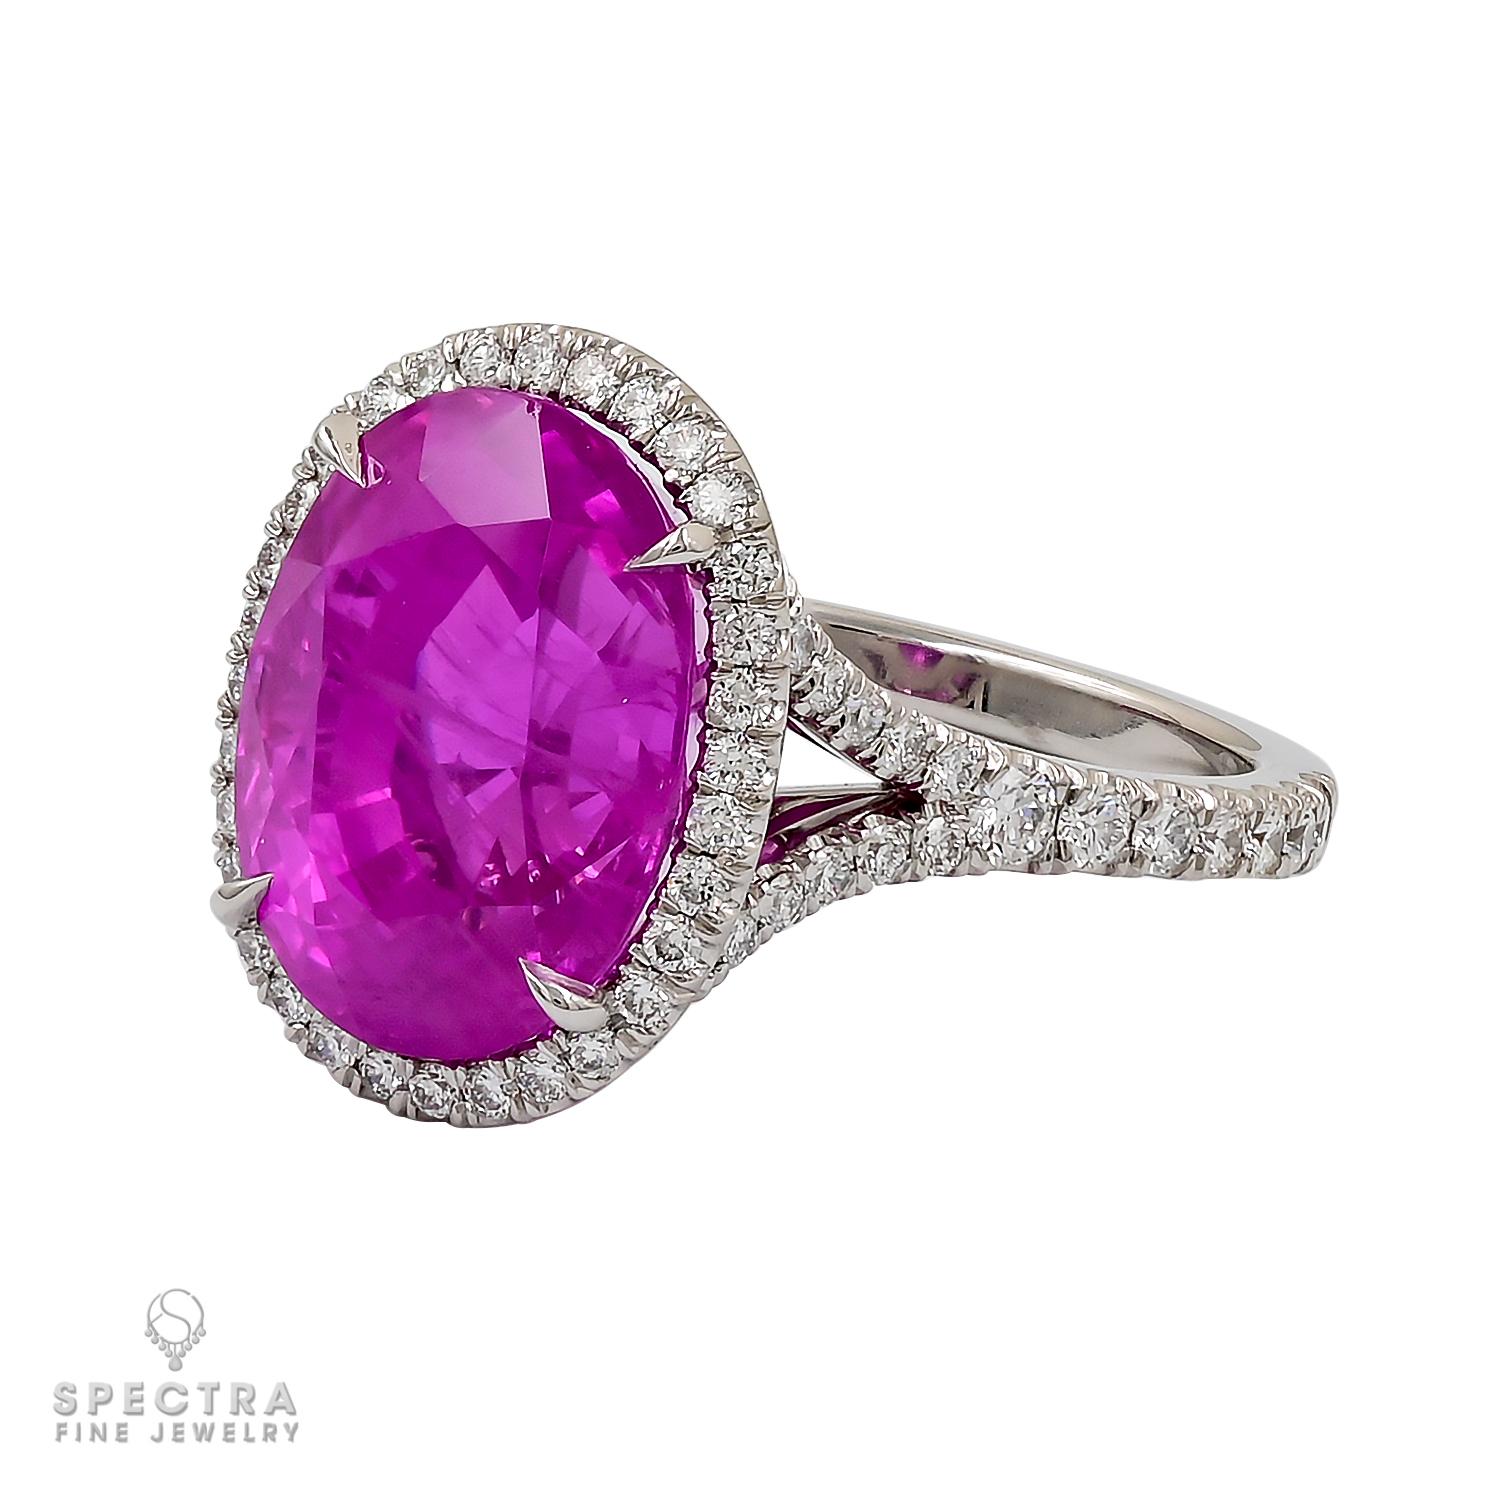 Experience timeless elegance with this exquisite 10.06 carat Oval Burma Pink Sapphire Diamond Ring. The center of attention is a mesmerizing oval-shaped, heated Pink Sapphire weighing a remarkable 10.06 carats. Certified by GRS, the GemResearch